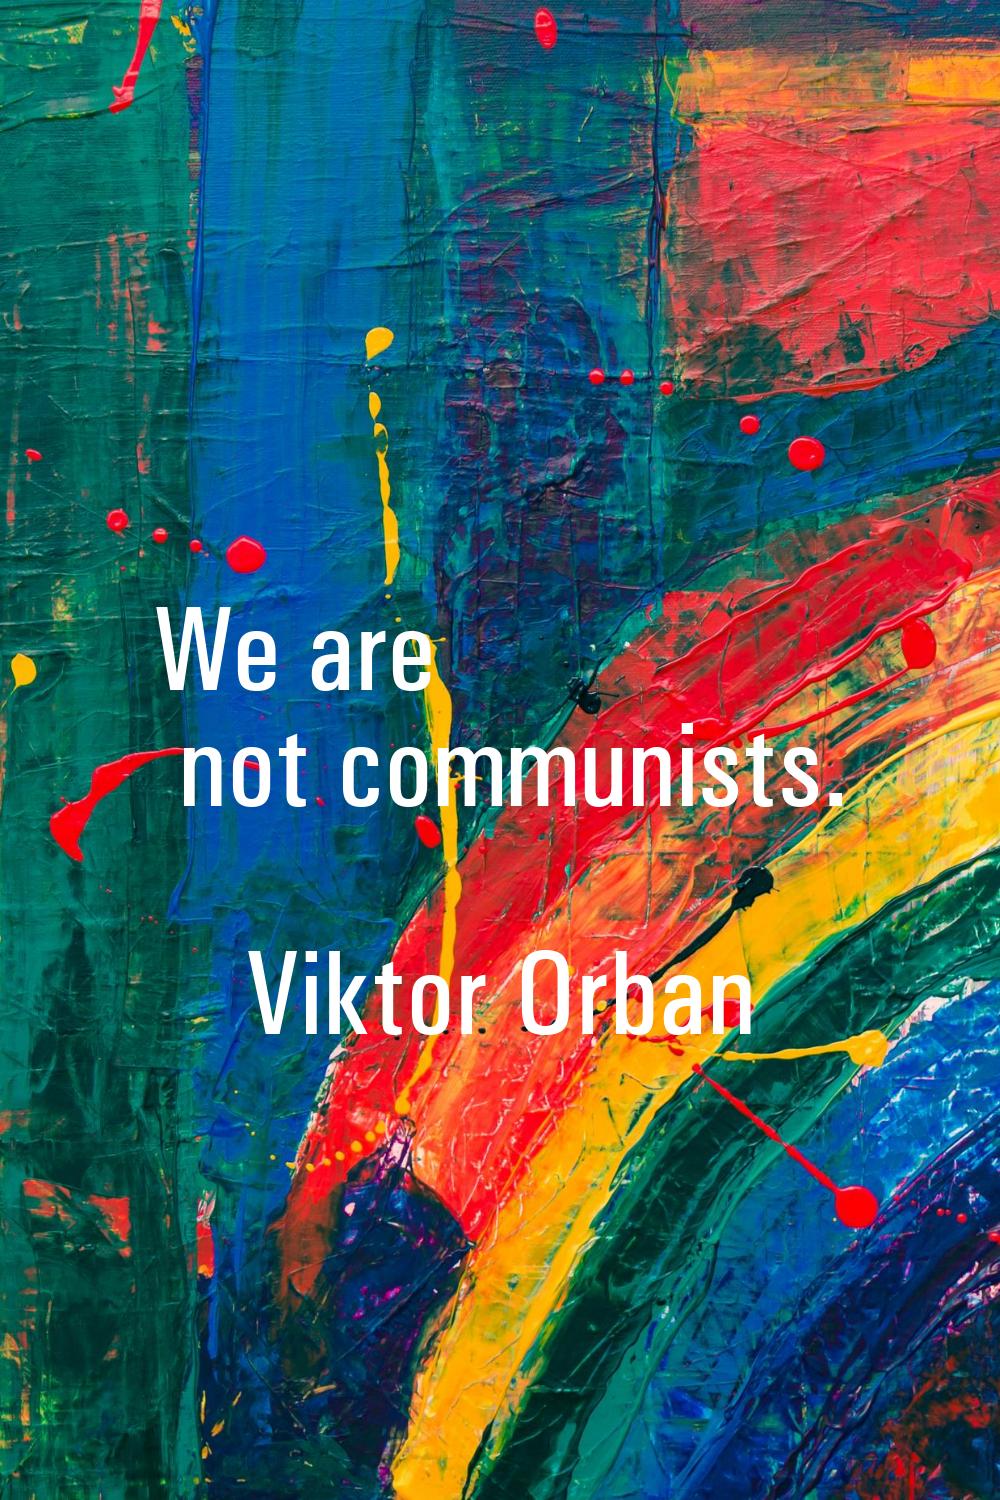 We are not communists.